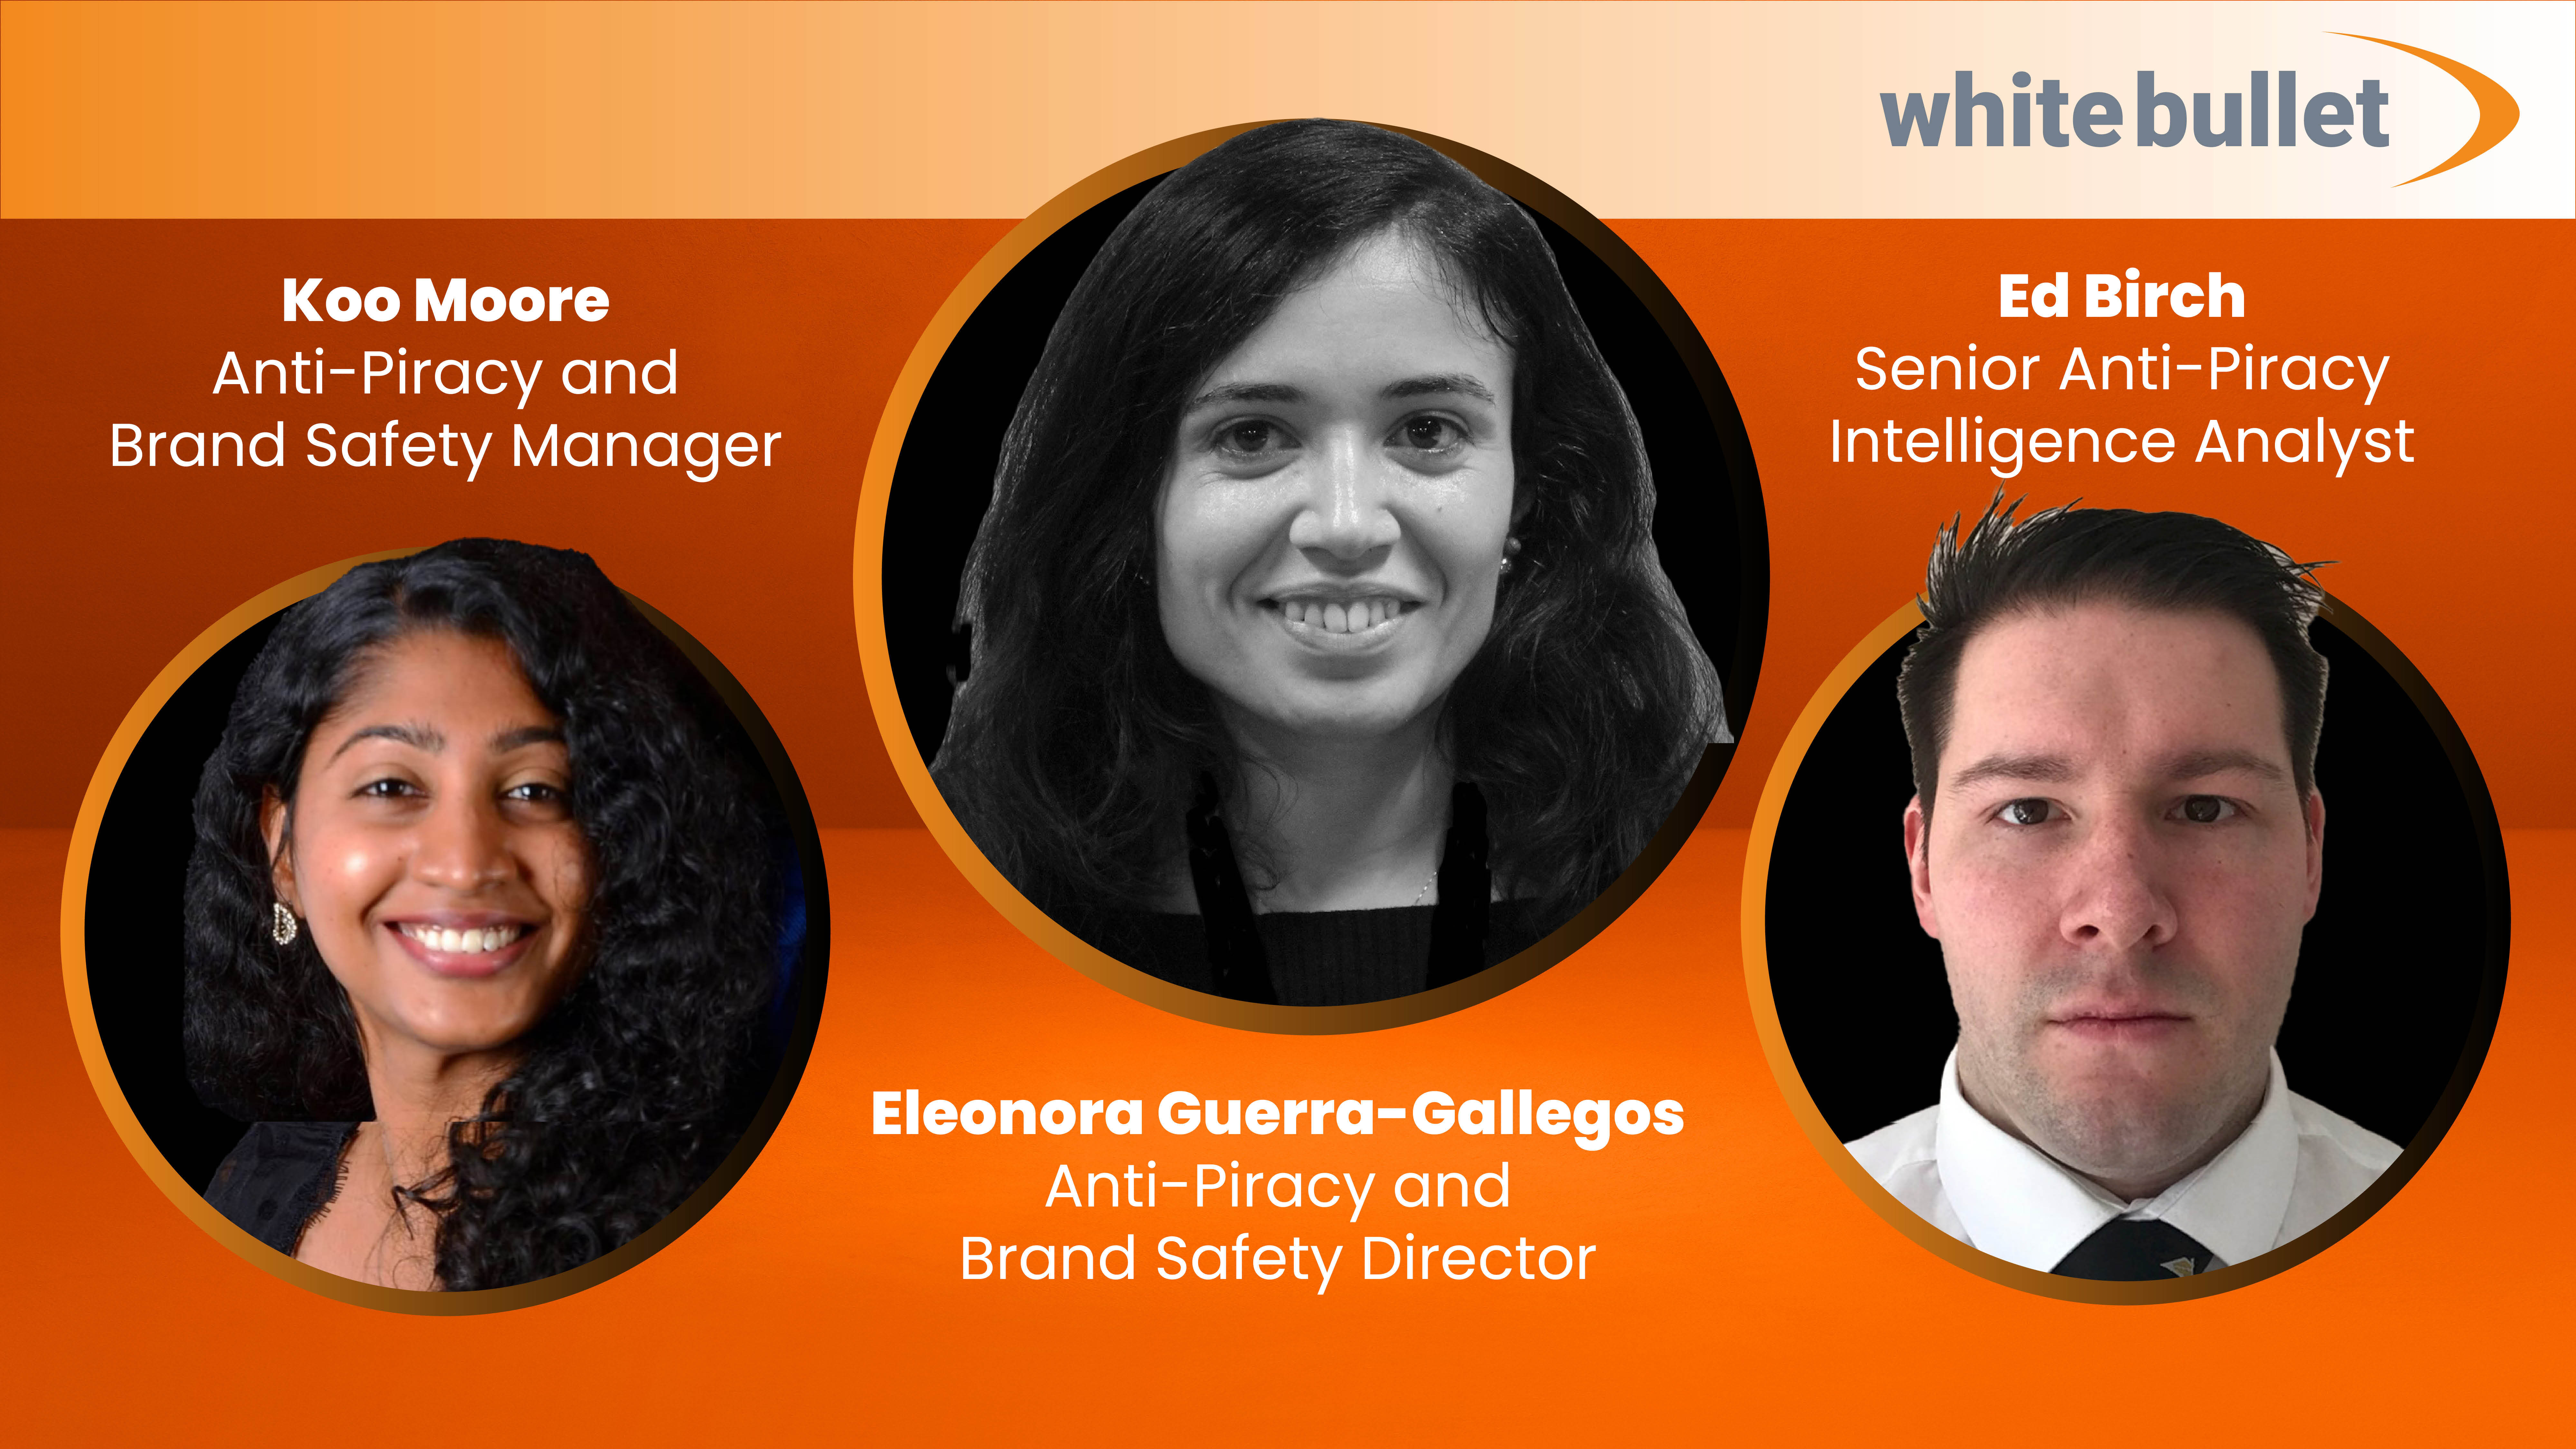 White Bullet Expands EMEA Team With The Appointment Of Anti-Piracy And Brand Safety Experts